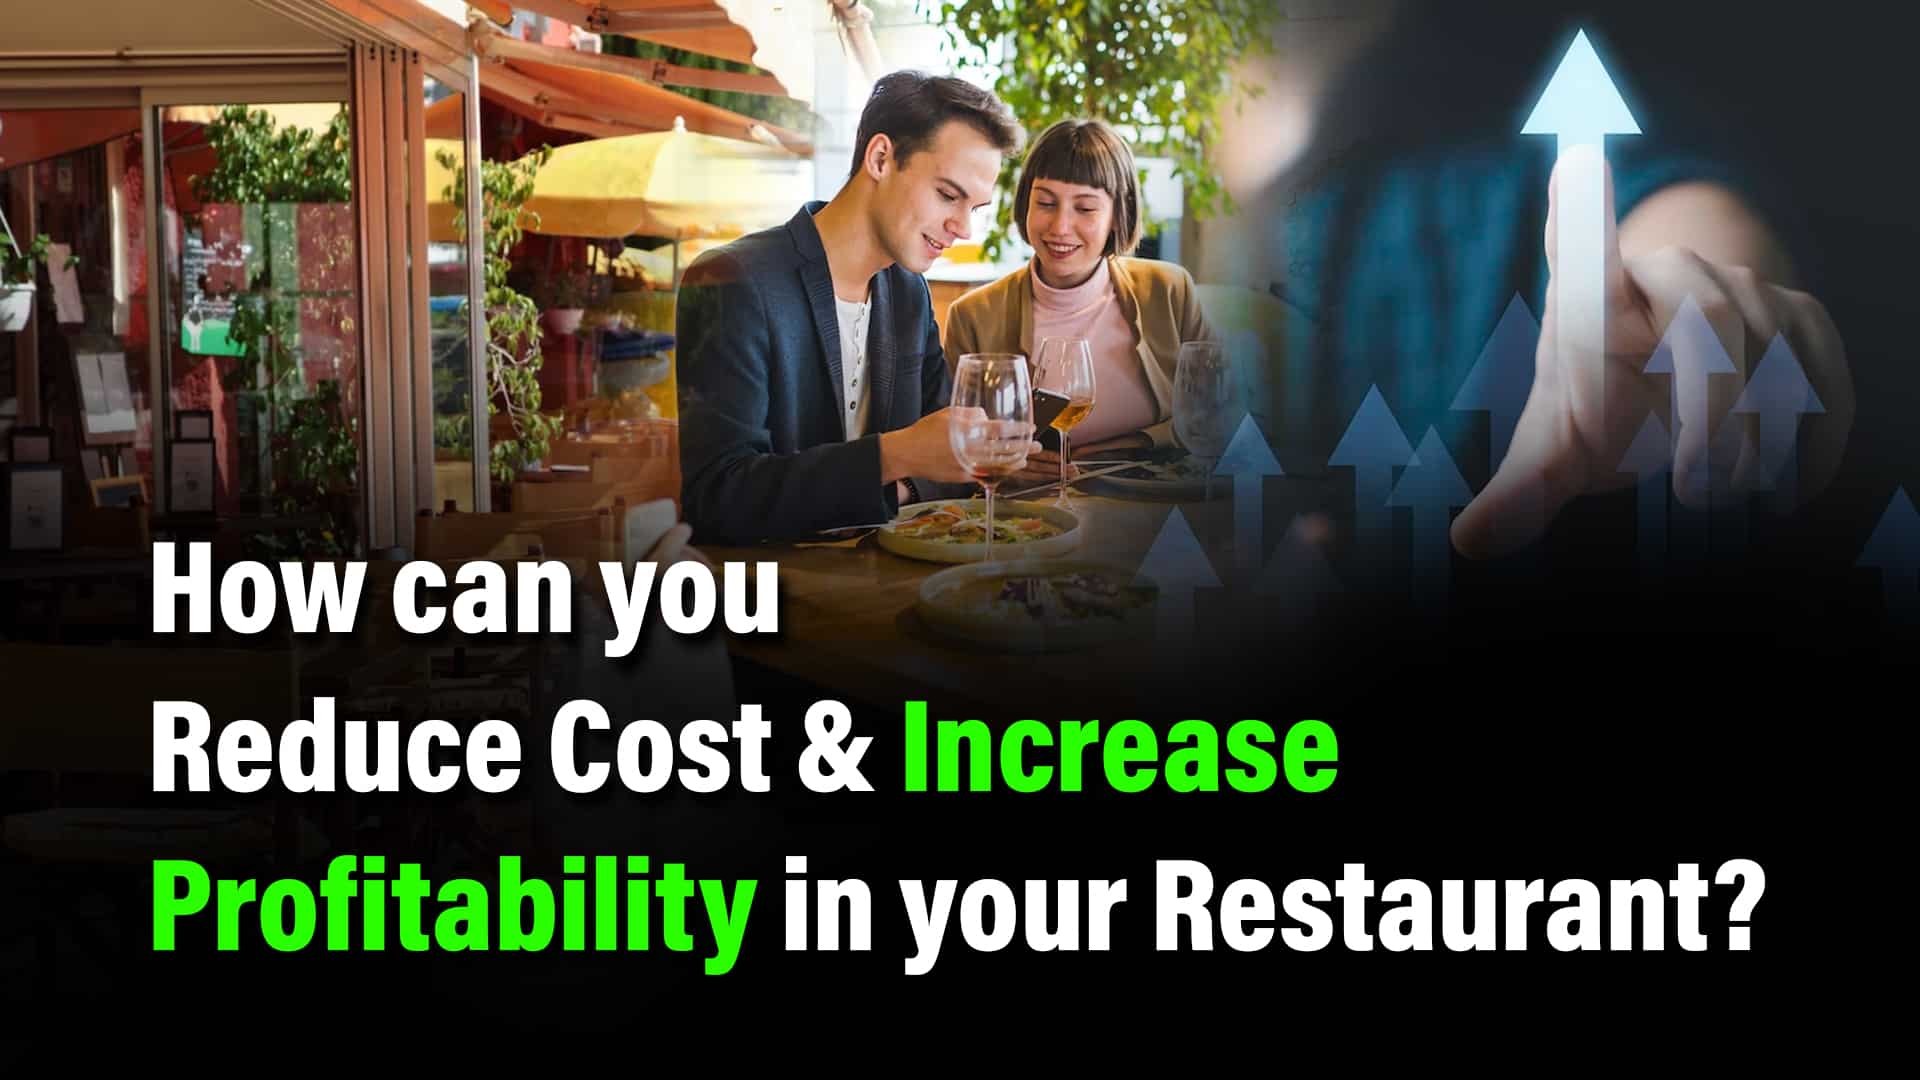 How can you reduce cost and increase profitability in your restaurant